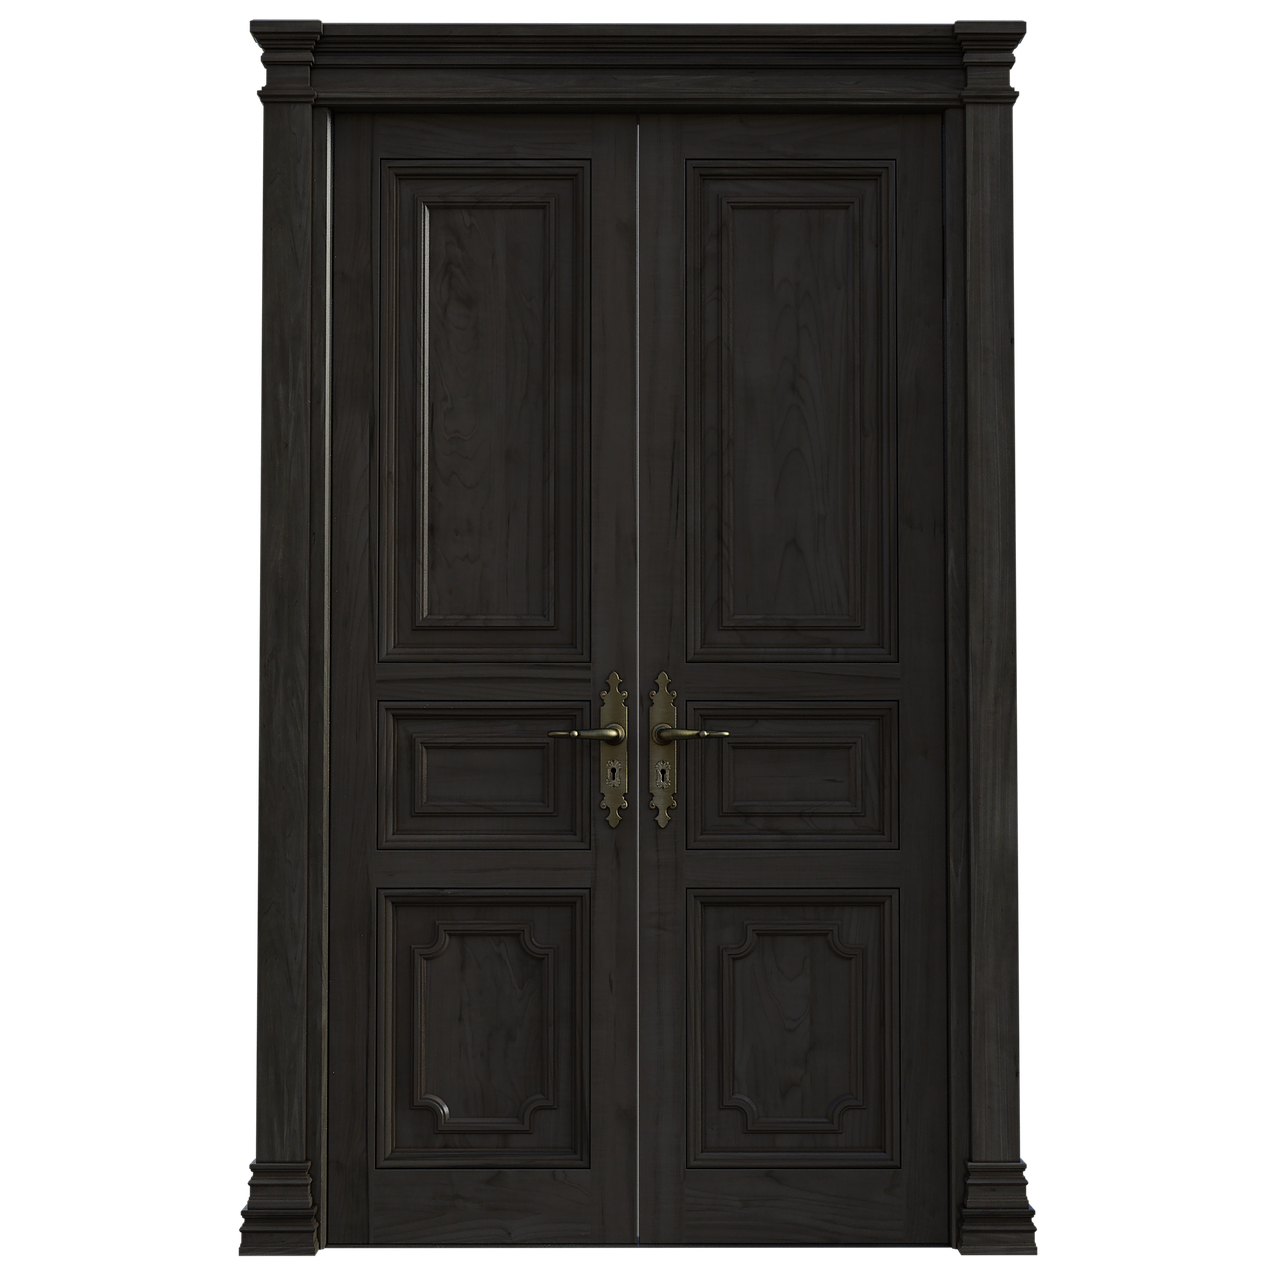 a close up of a wooden door on a black background, polycount, baroque, low quality 3d model, render unreal engine-h 704, classicism style, thumbnail